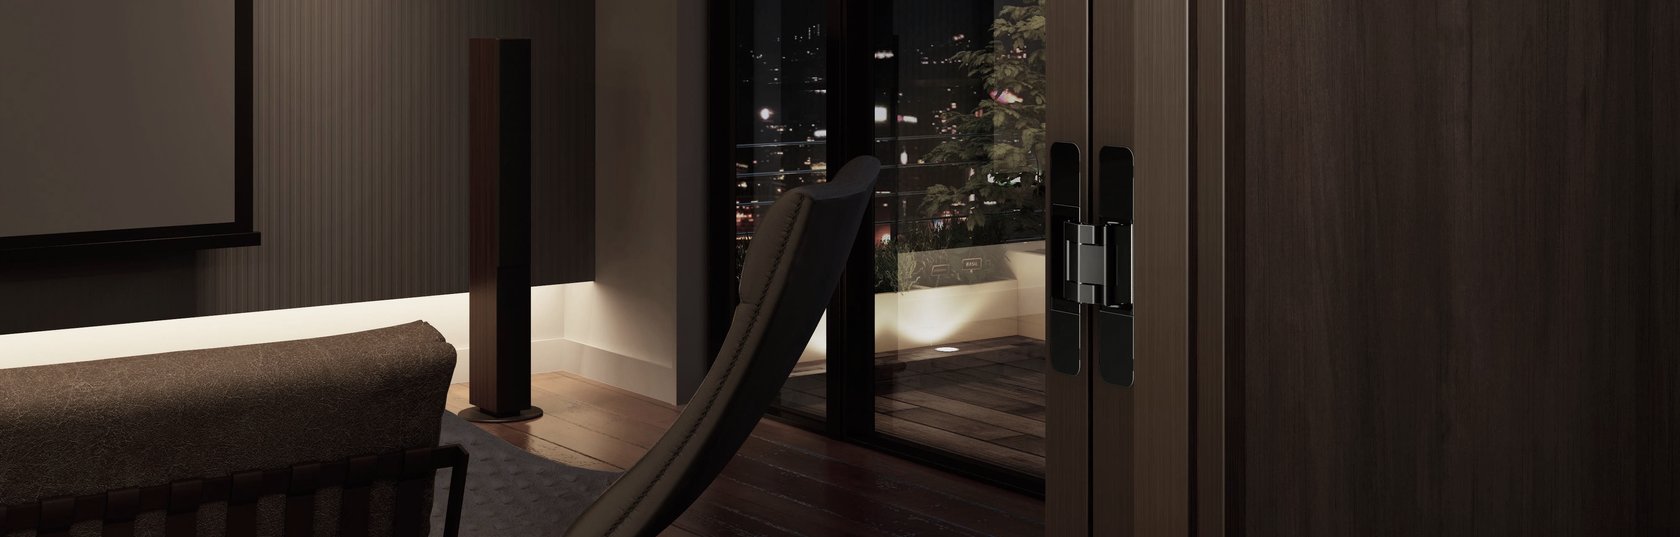 Concealed hinges: The rise of minimalist functionality in doors